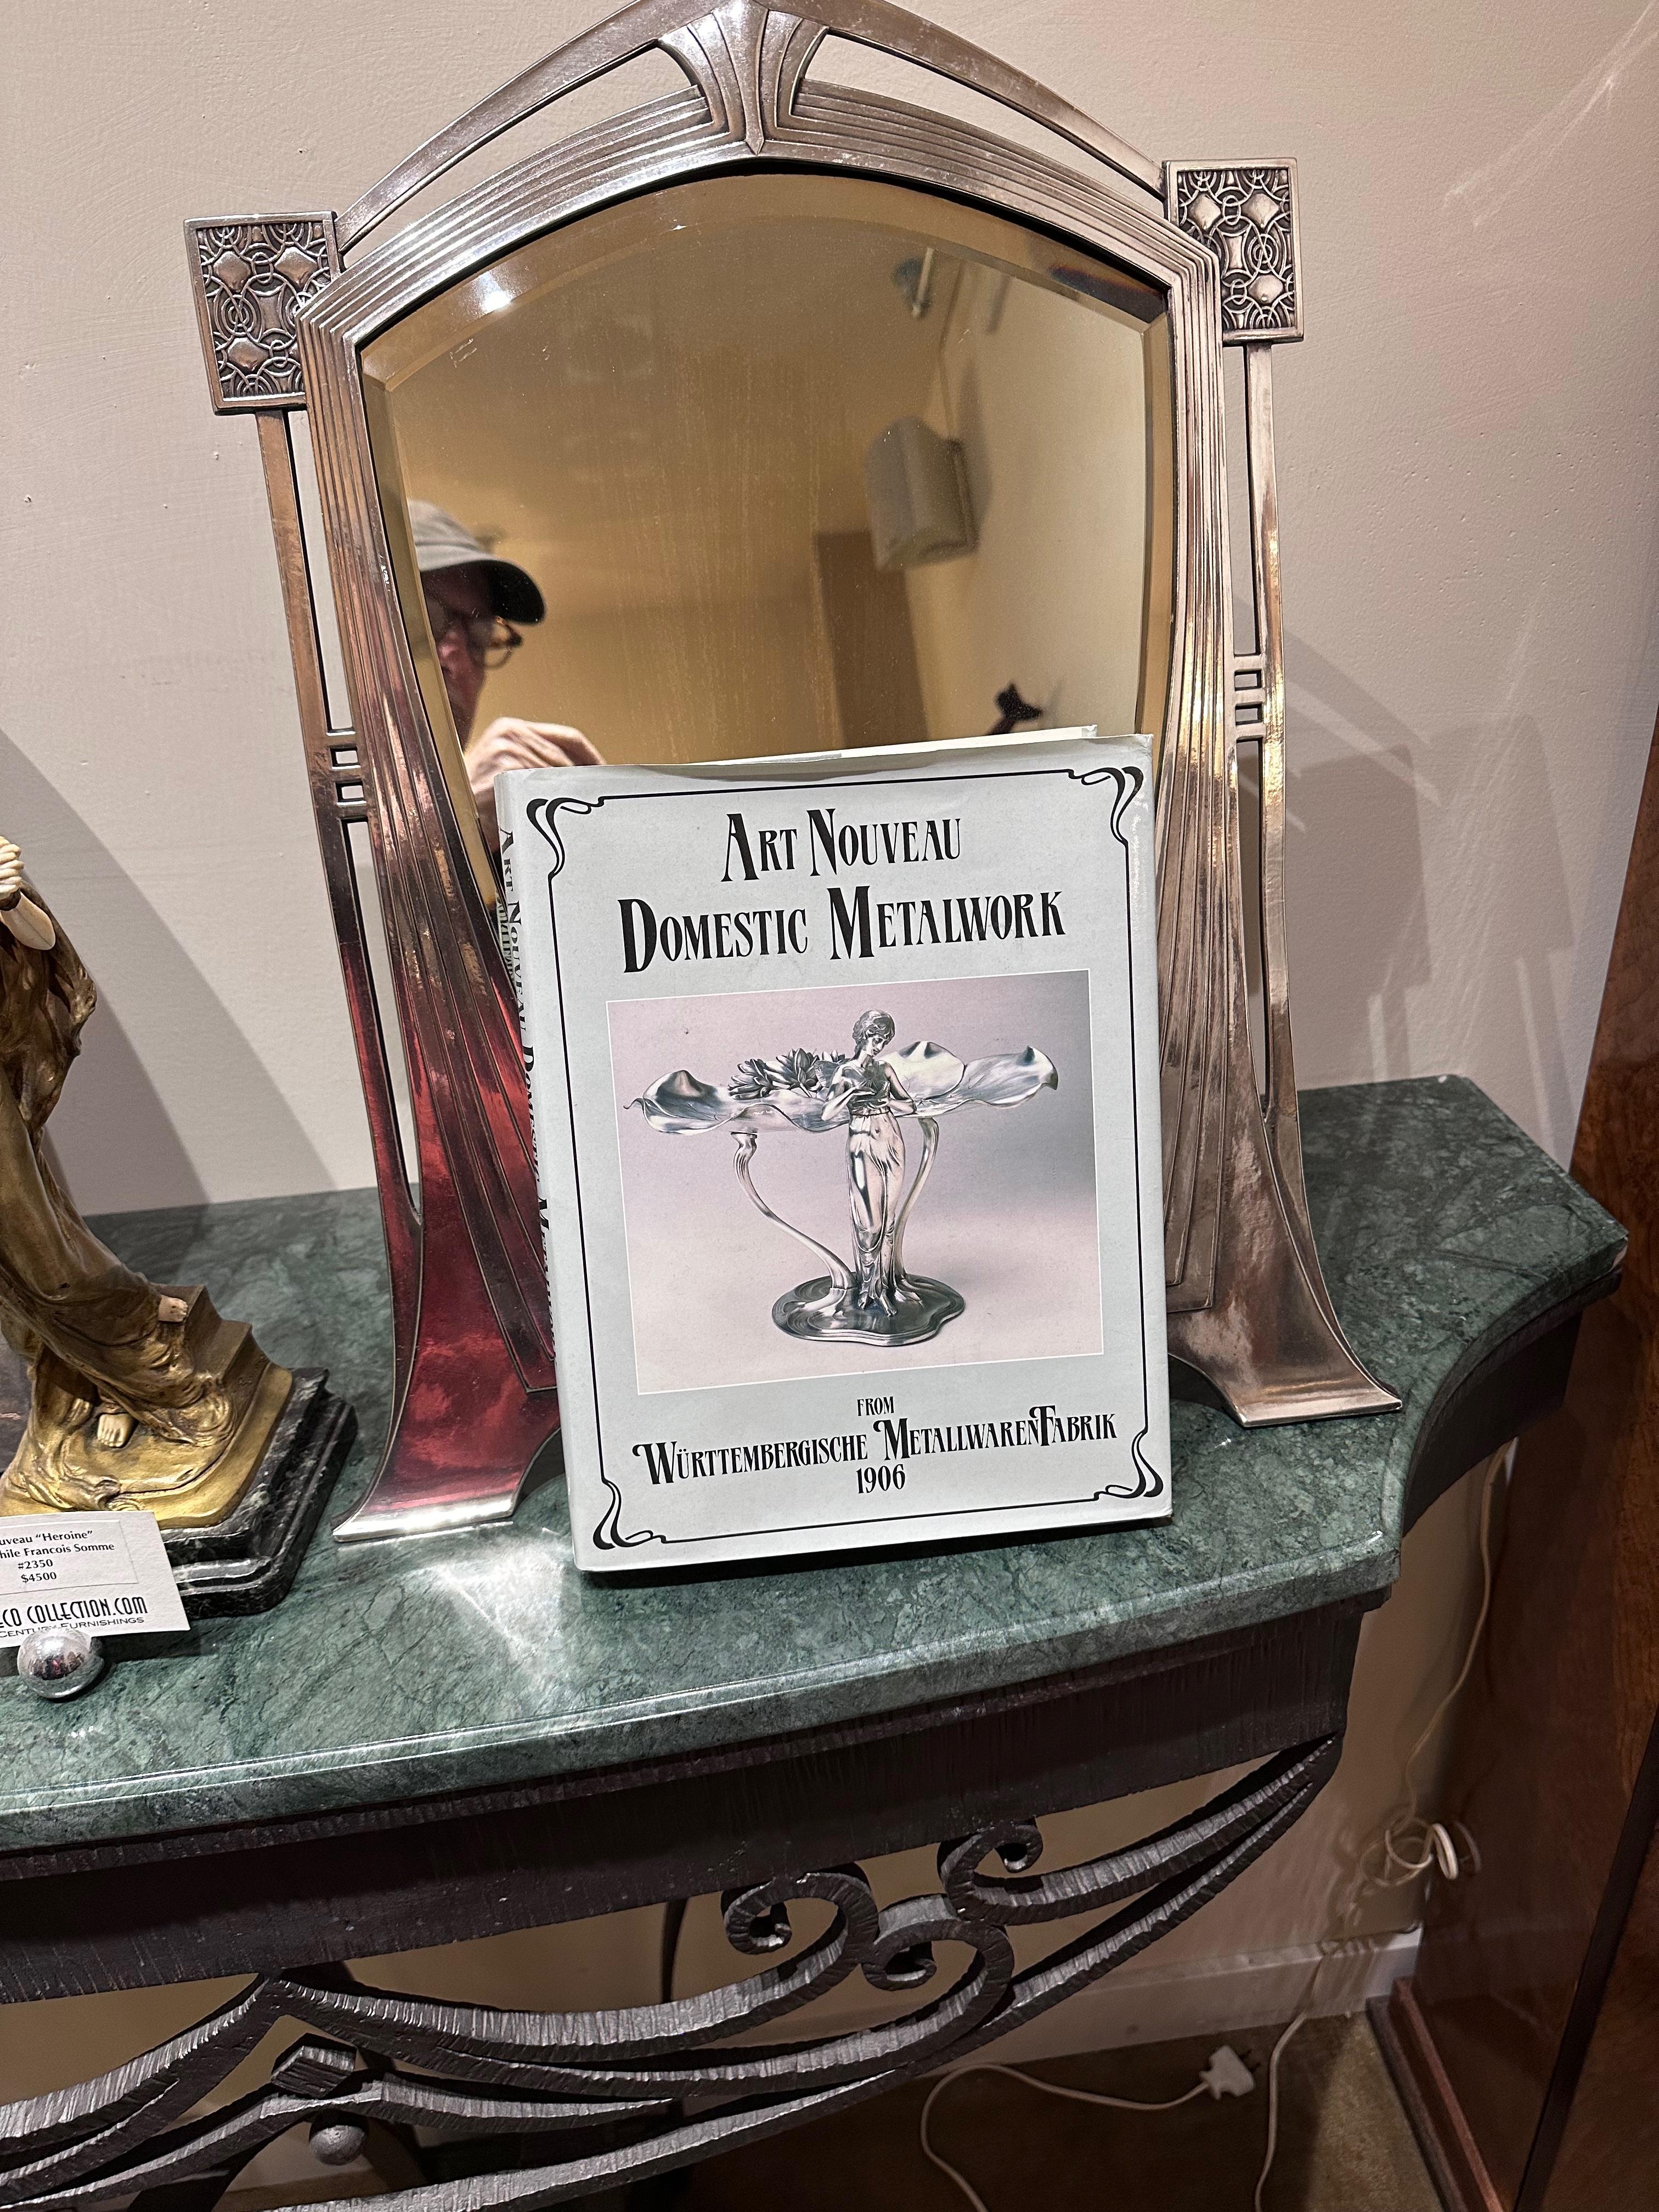 This Silverplate Art Deco/Art Nouveau WMF Table Mirror is ideal for a dressing table, vanity, or mantle. It features stylish details that transition from Art Nouveau to Art Deco, with elements that could even be considered Secessionist design. The